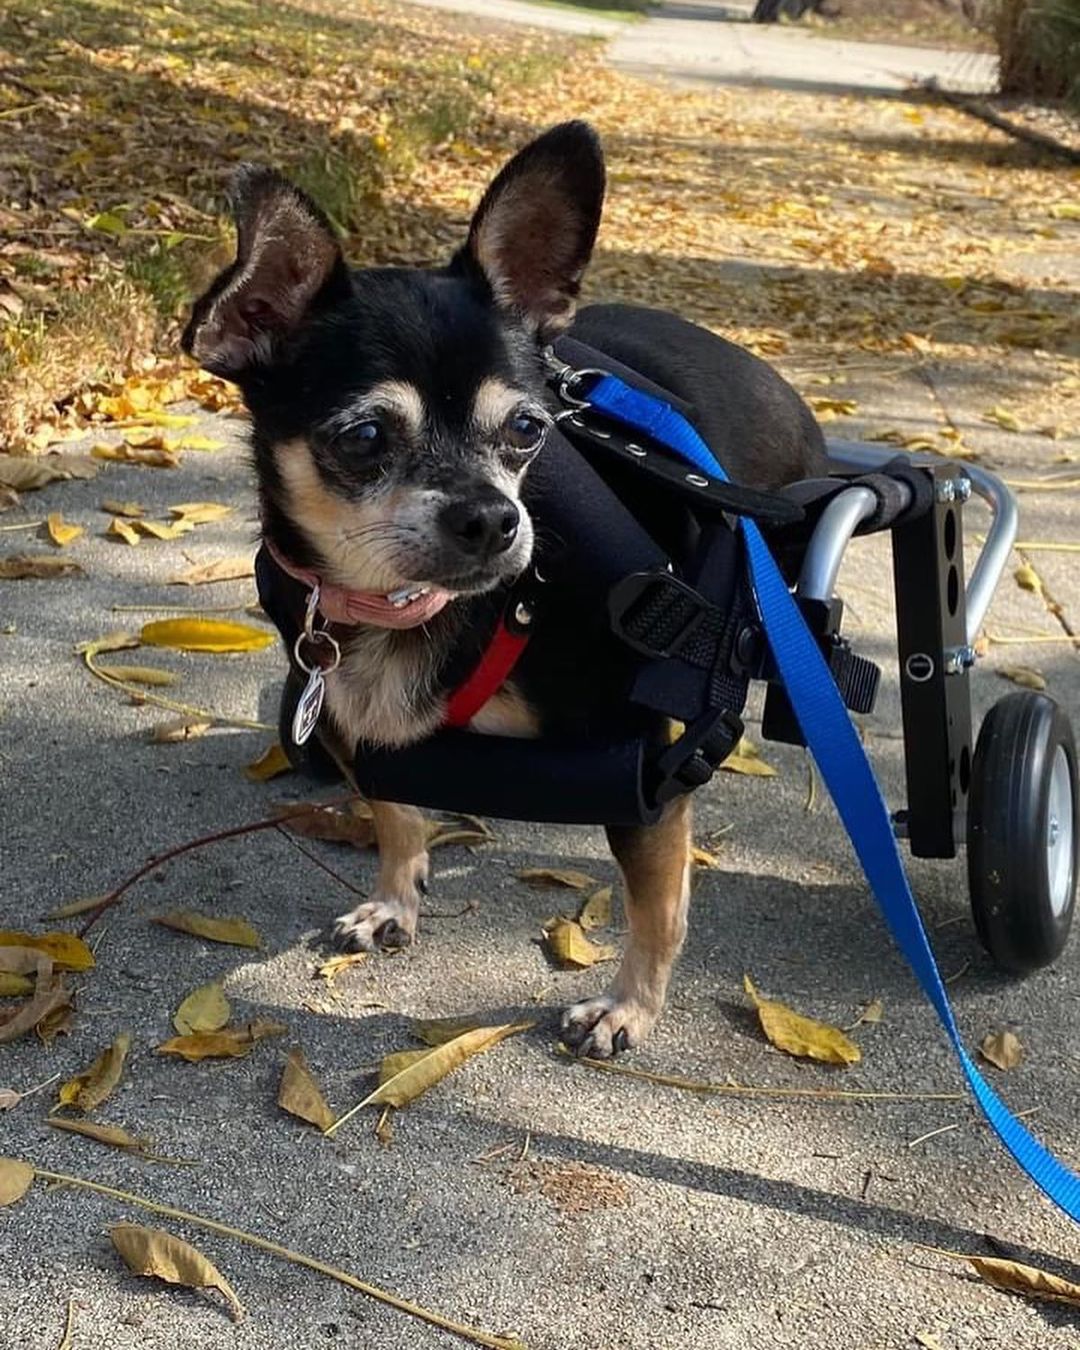 Wonderful news our little special needs chihuahua named Angela was adopted today.  Hopefully all goes well.  As we got to know her personality she was OK with other dogs but didn’t like to share the attention.  She will be living in a home with one other dog so hopefully it works out.  Thanks you to those that helped networked her.